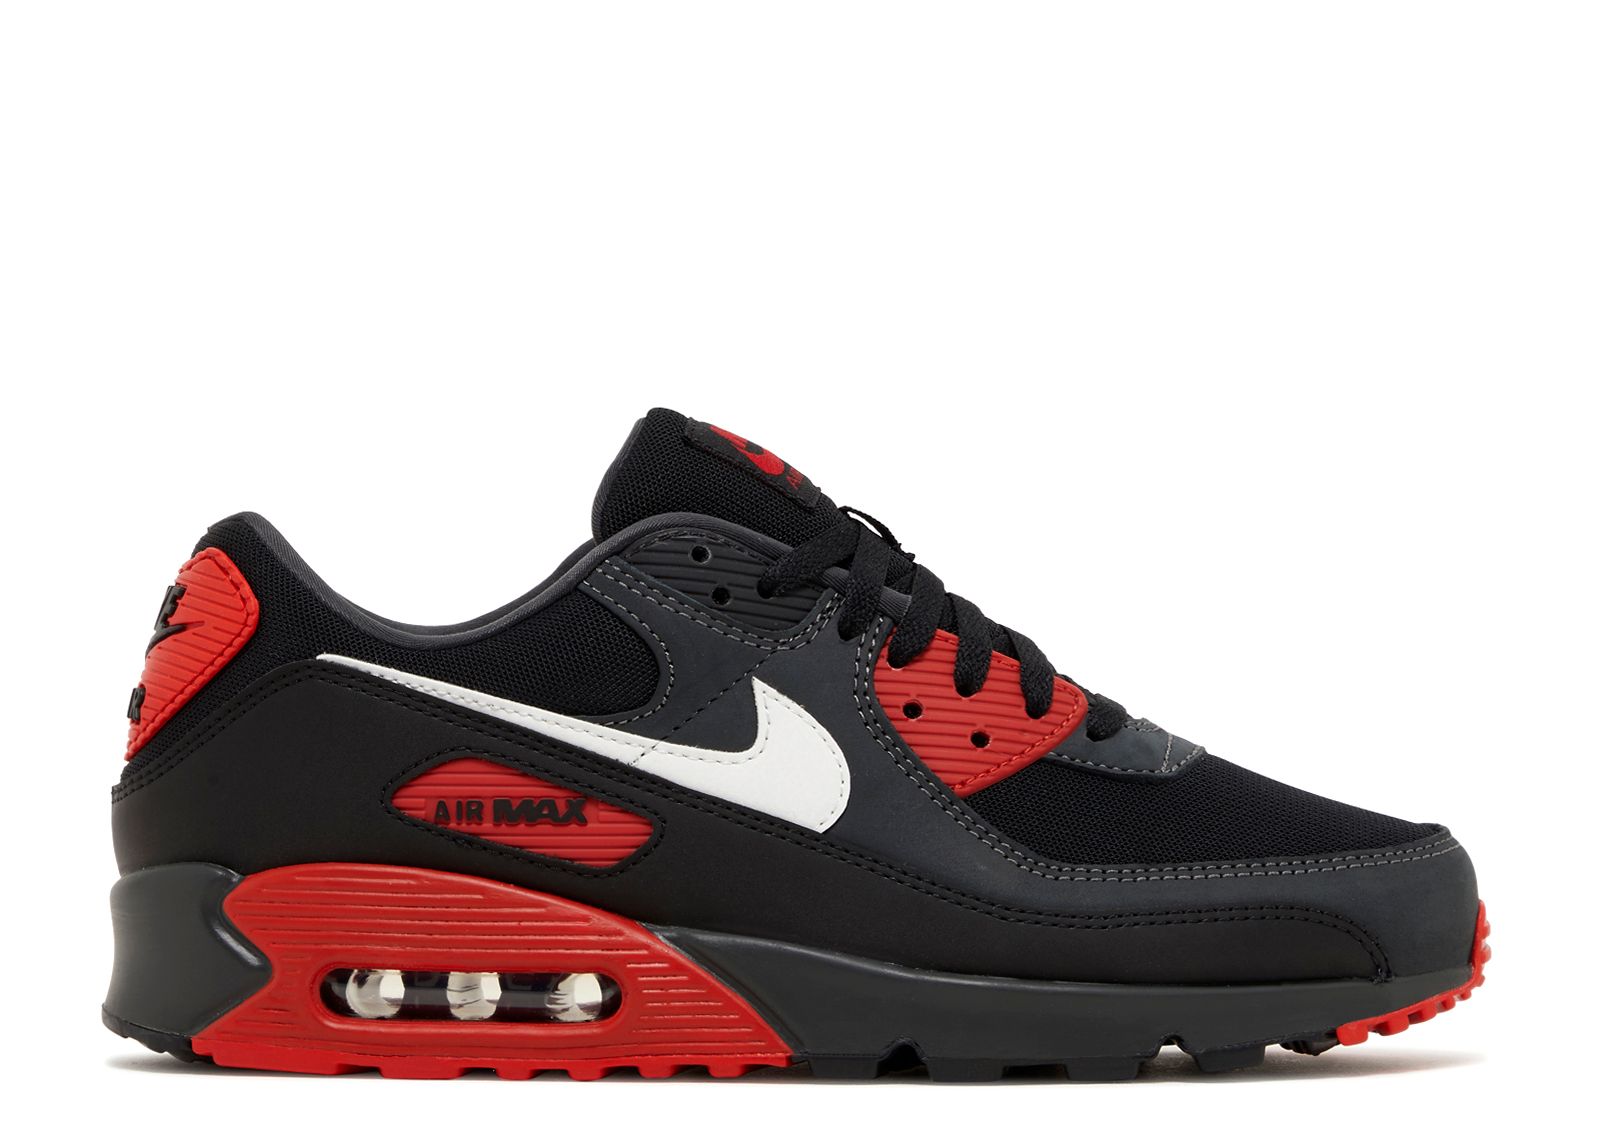 Air Max 90 'Anthracite Mystic Red' - Nike - FB9658 001 - anthracite ...